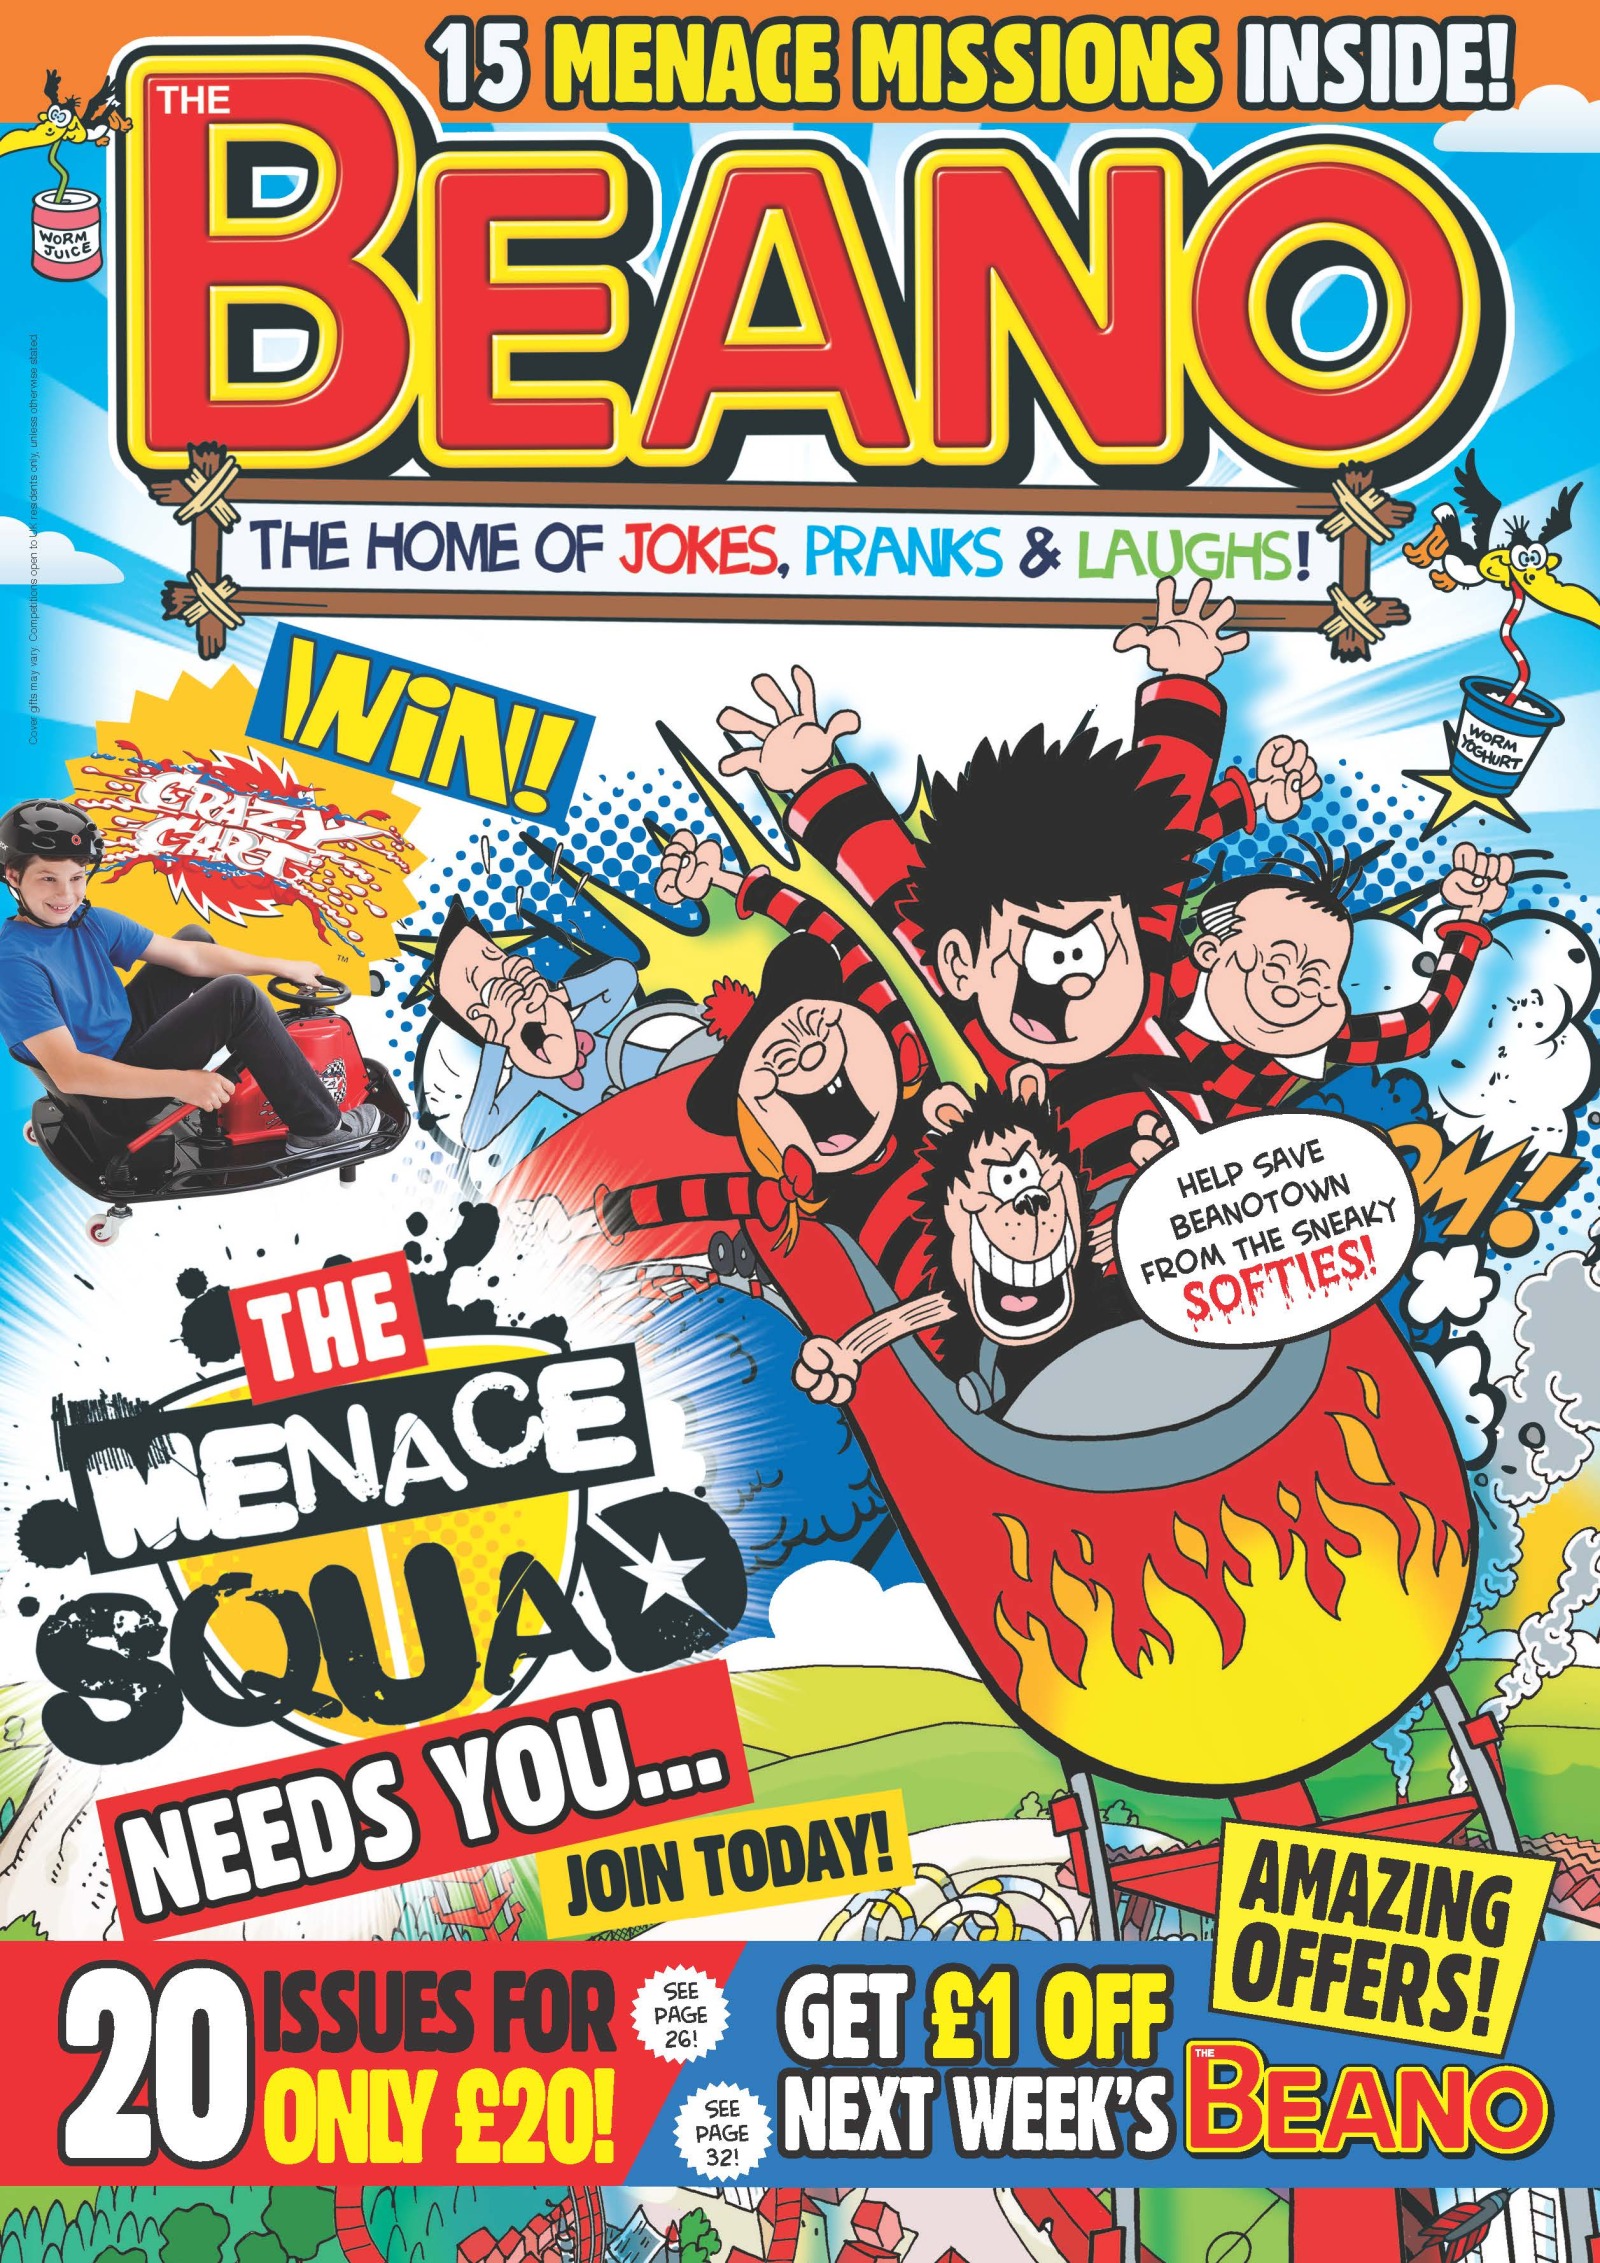 The Beano - Daily Mirror Giveaway 2014